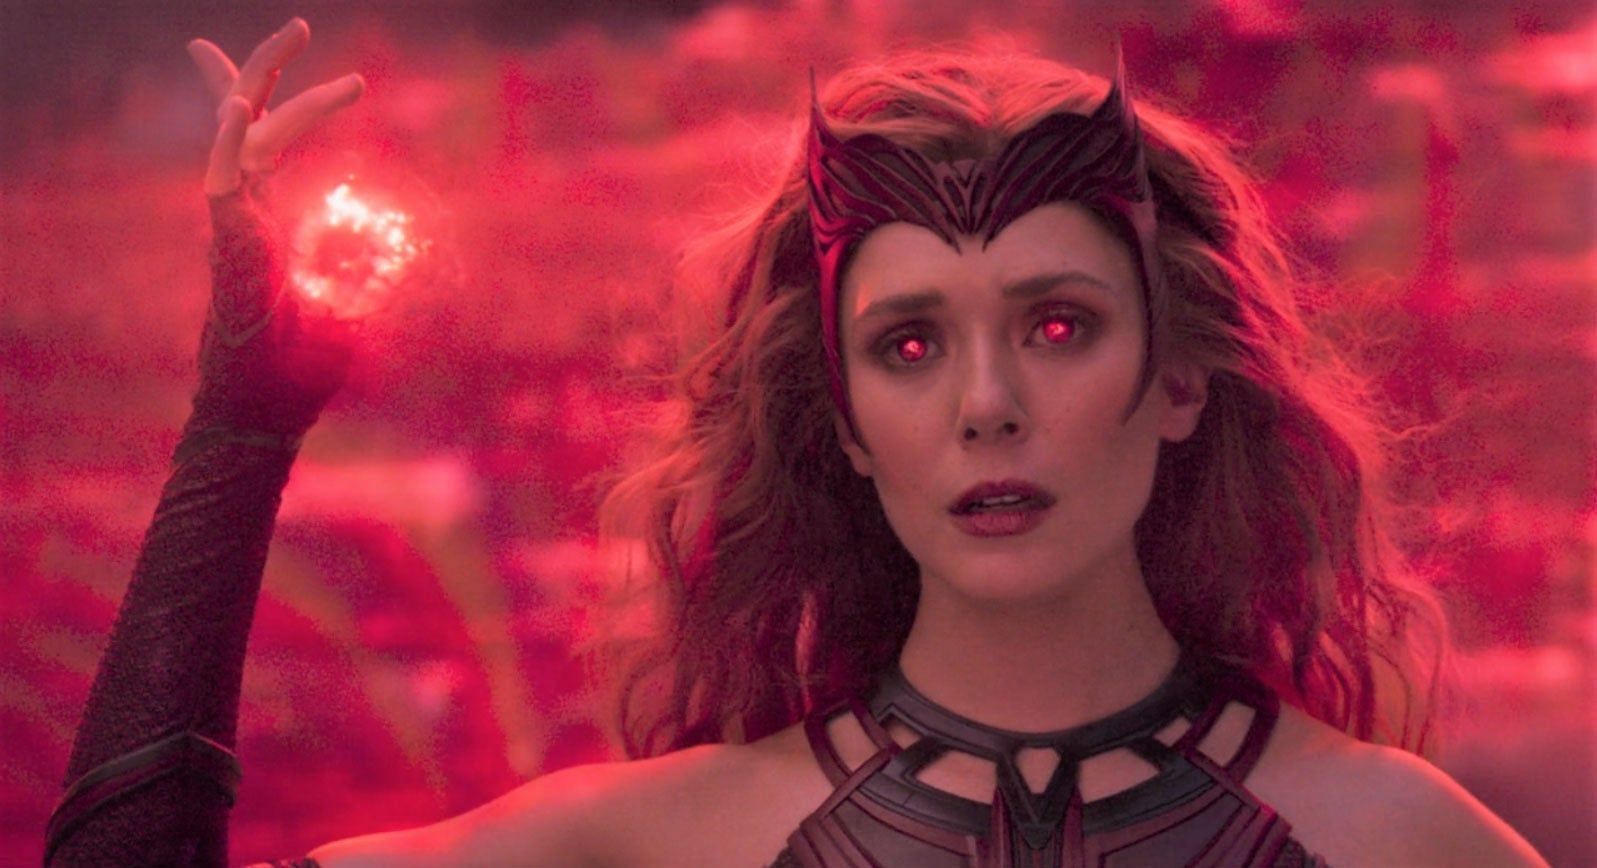 Wanda Maximoff stands tall as one of the strongest heroes in the MCU (Image via Marvel Studios)